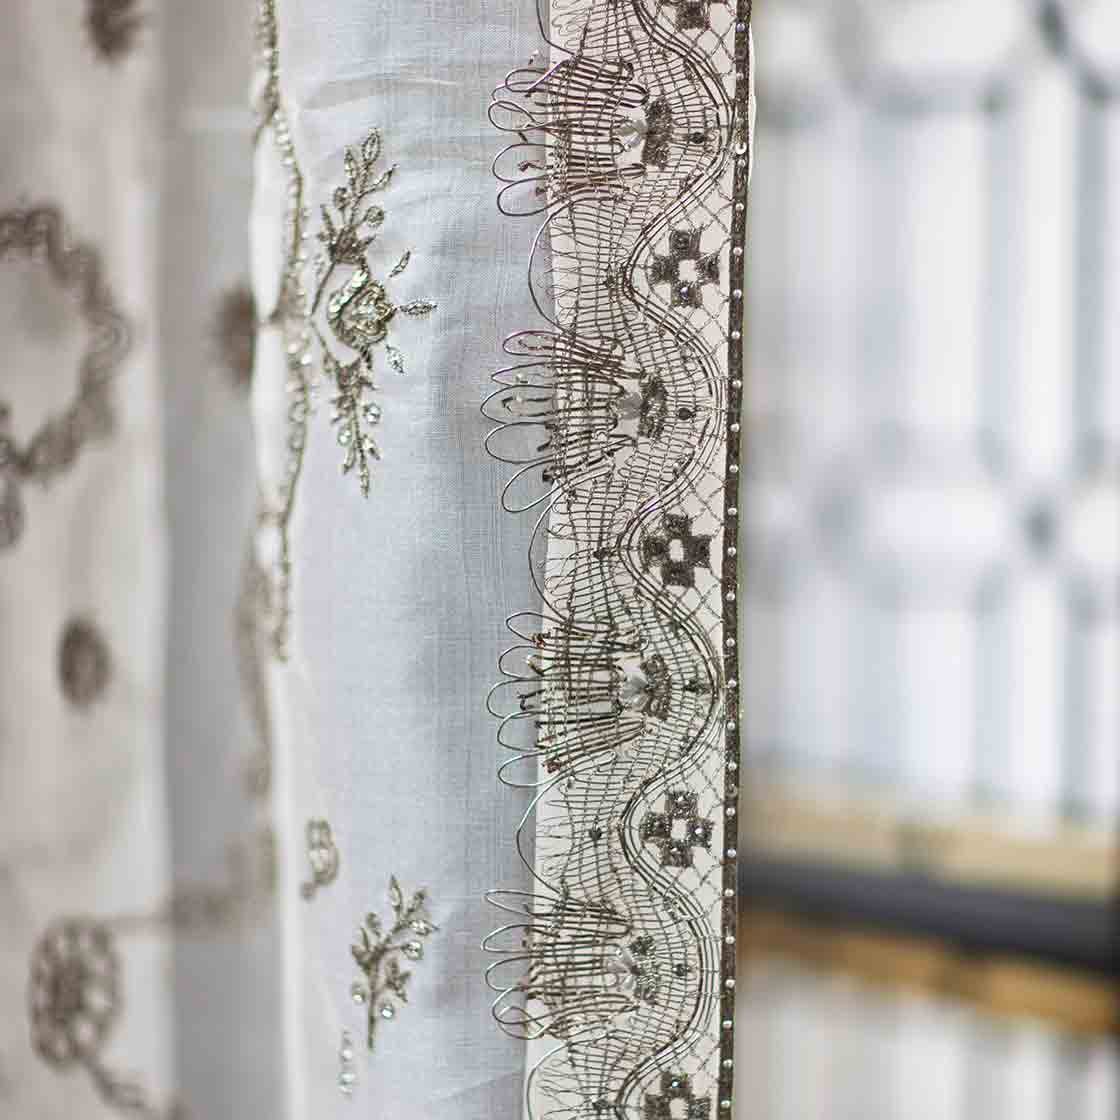 Tagore embroidery on drapes in Organza - Beaumont & Fletcher